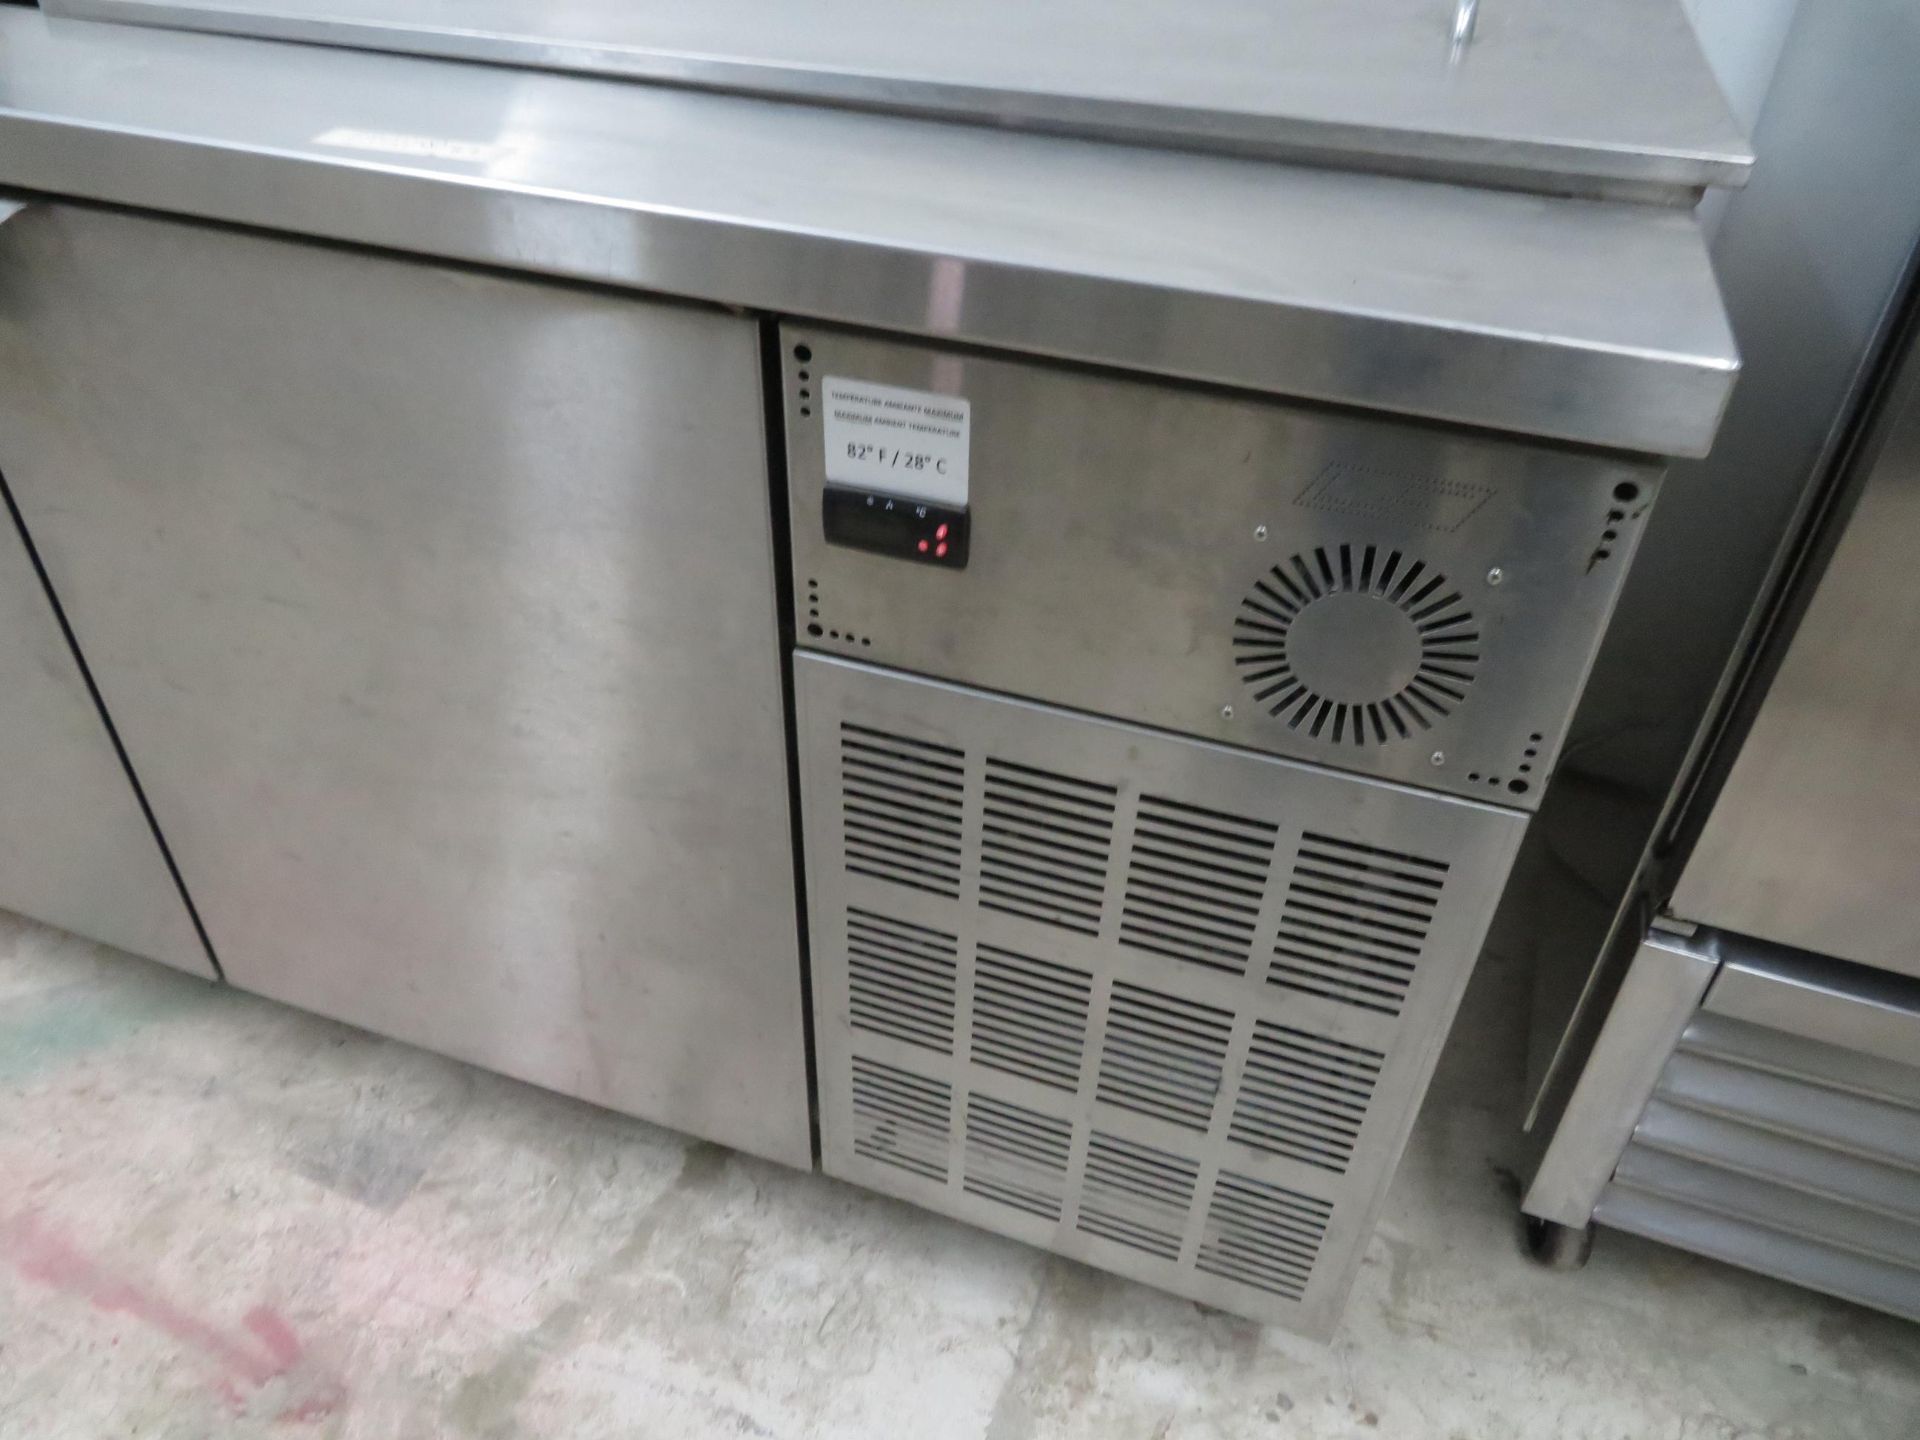 INOX FAB 3 door stainless steel refrigerated table, Mod # TSBCI-84-32 approx. 84"w x32"d x 36"h - Image 3 of 4